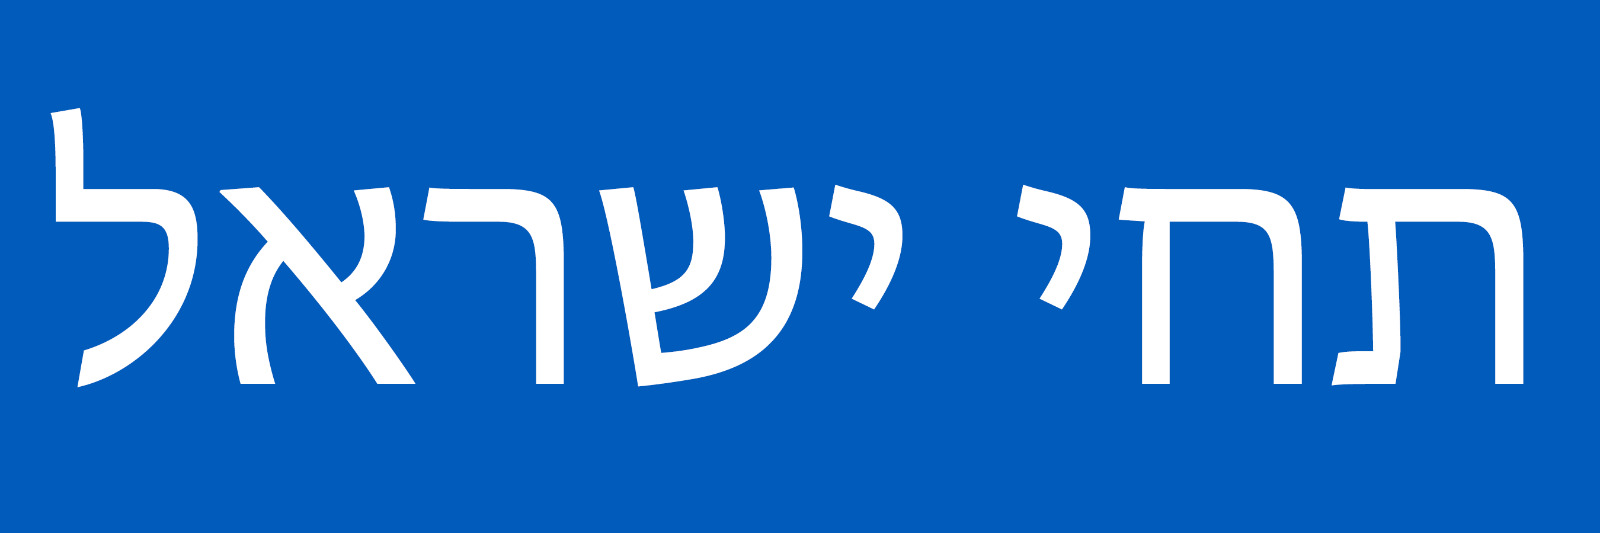 Long Live Israel in Hebrew Bumper Sticker Support Israel Decal